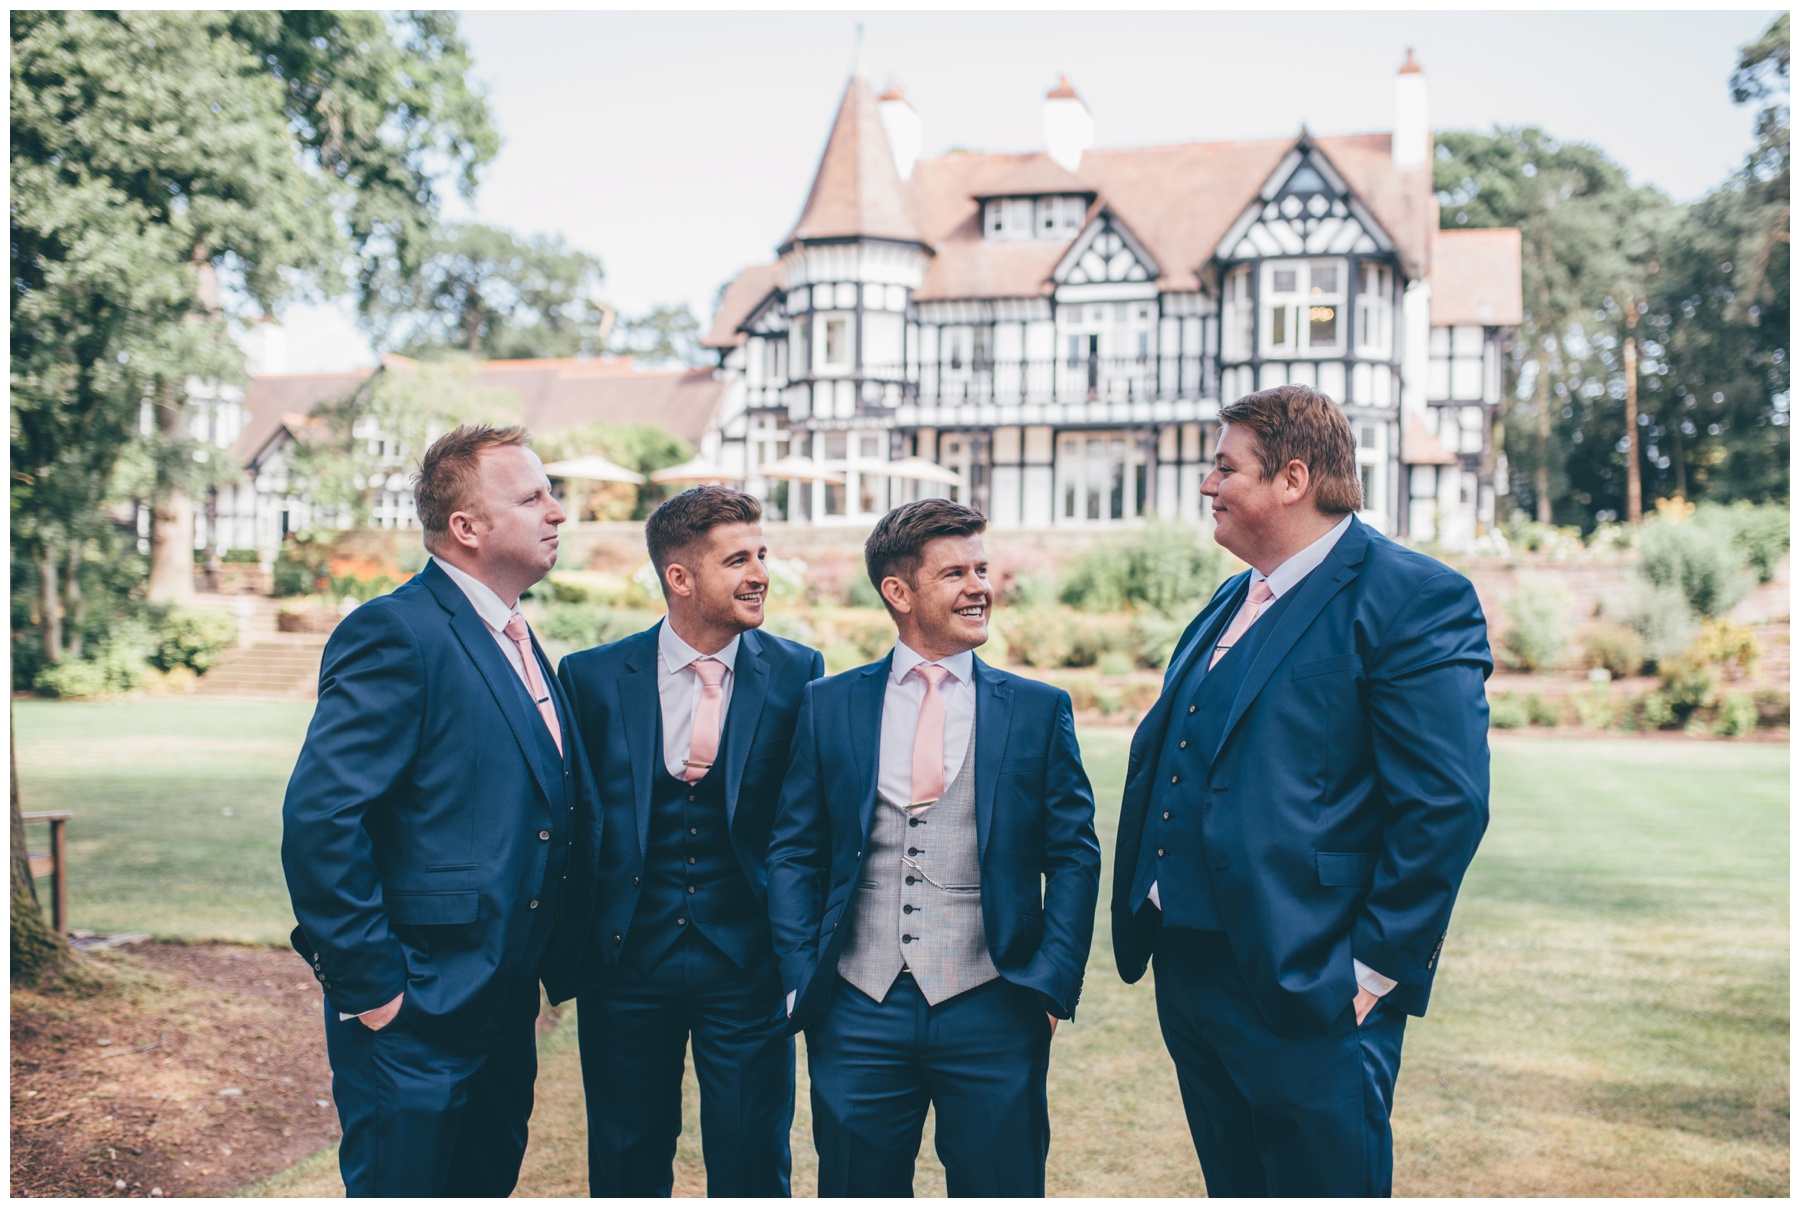 The groom and his groomsmen before the wedding at Tilstone House in Cheshire.